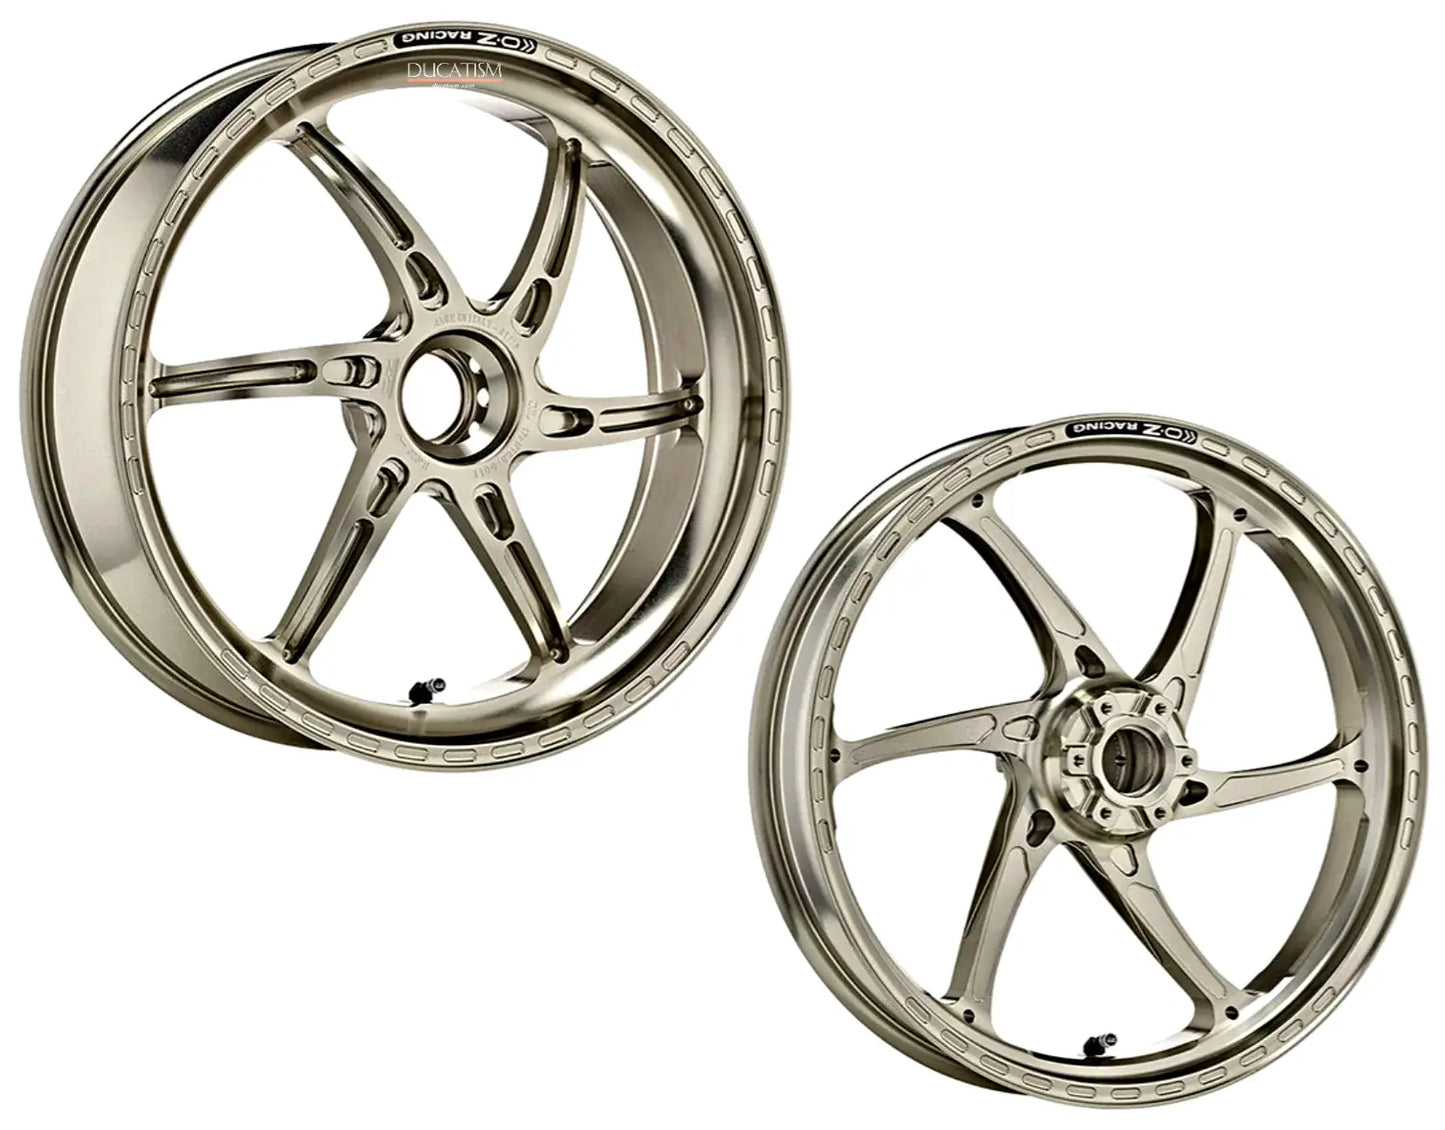 Titanium anodized 5/1 Italy in stock DUCATI PanigaleV2 Forged wheel set OZ-Racing GASS RS-A F:3.5J-Rear 5.5J Panigale V2 StreetFighterV2 DU102012G-55T